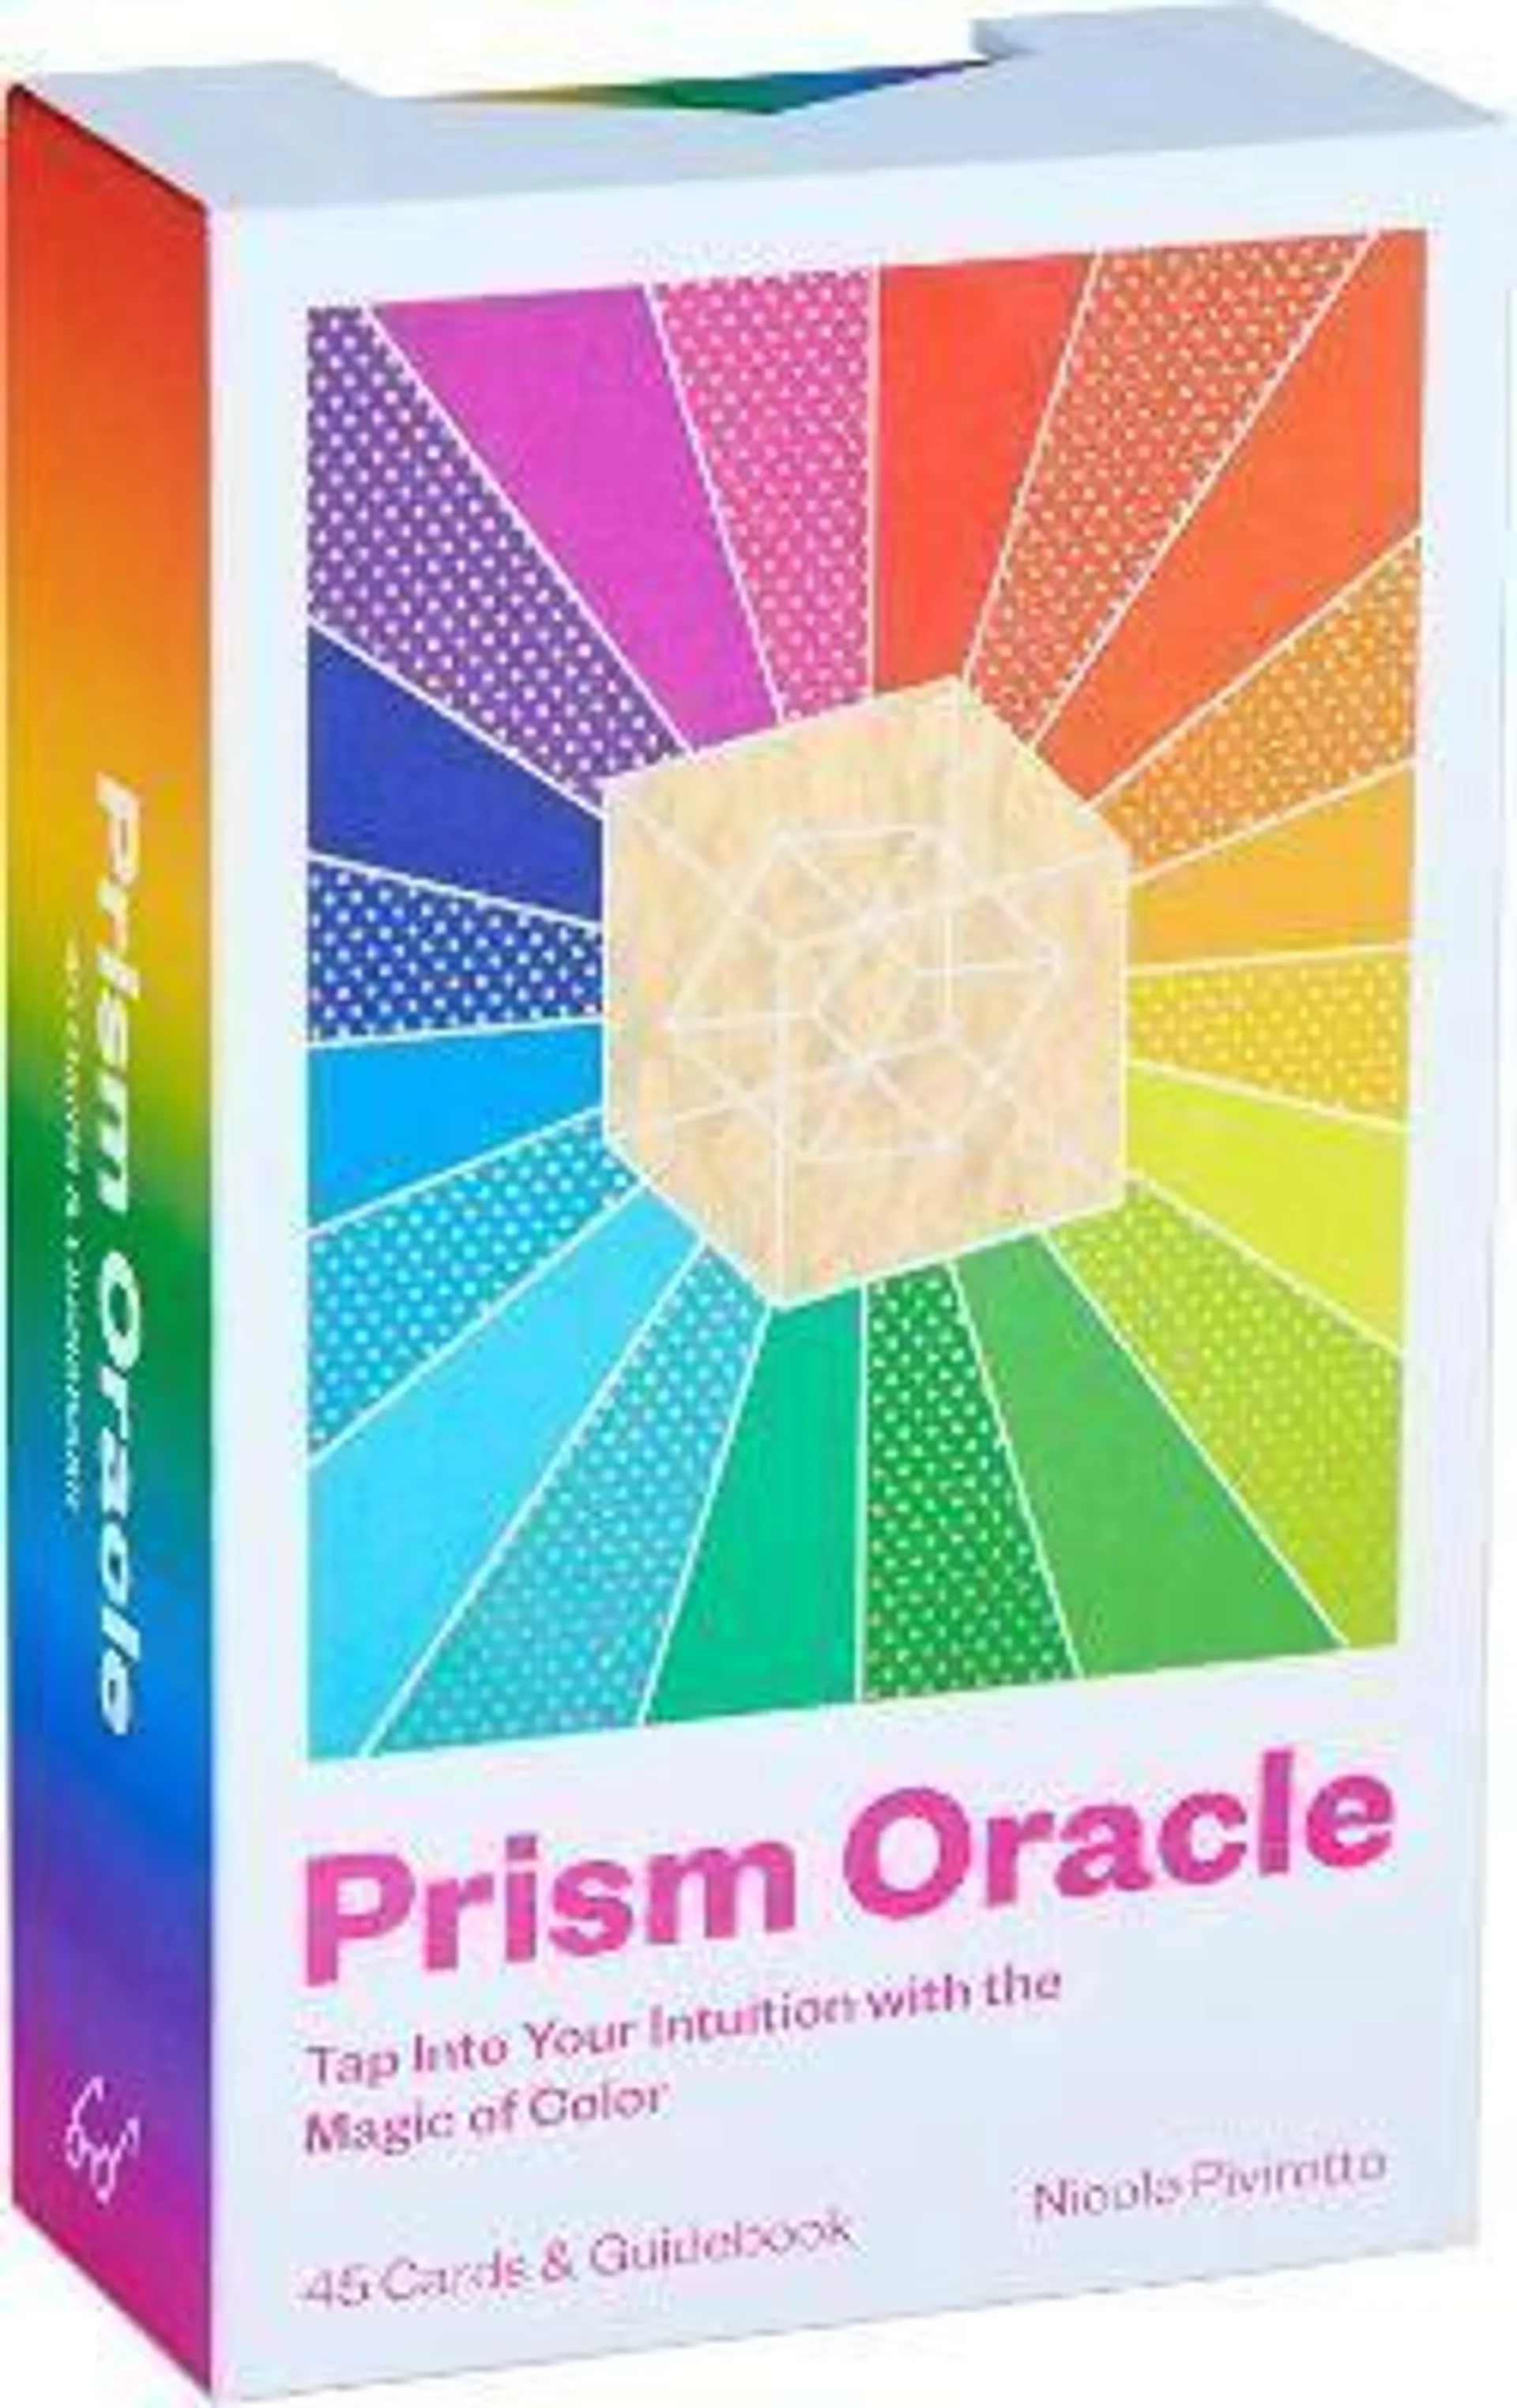 : Discover the power of color. This unique Prism Oracle deck uses the language of color to tap into your intuition.